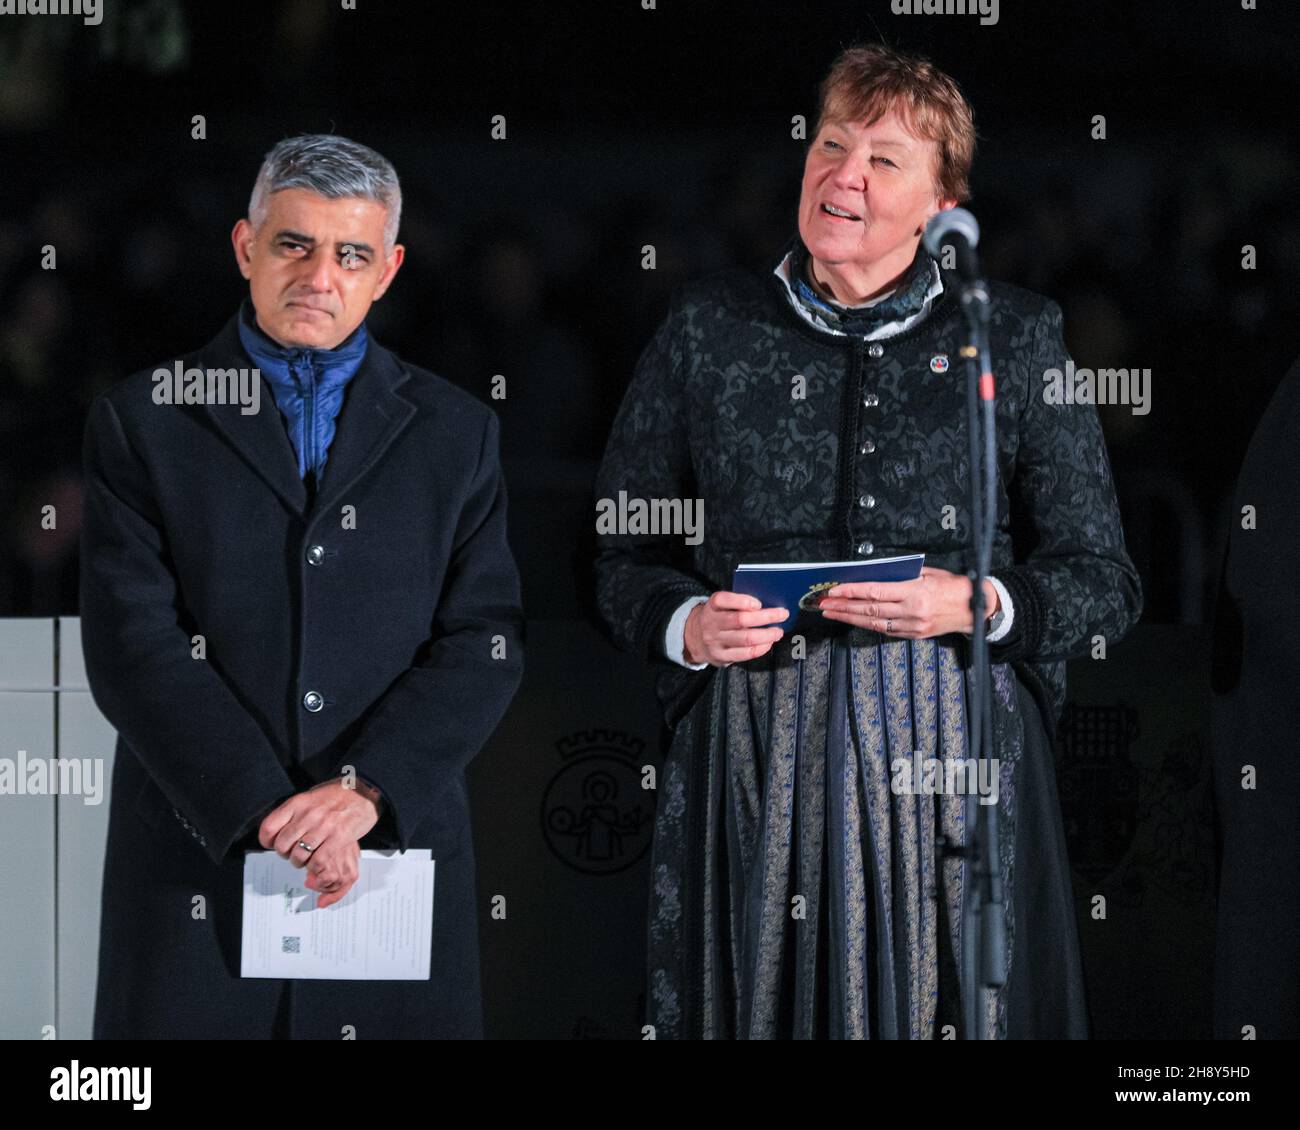 Westminster, London, 02nd Dec 2021. The Mayor of London, Sadiq Khan, and the Mayor of Oslo, Marianne Borgen. The Trafalgar Square Christmas Tree lights are switched on in a traditional ceremony this evening. The 25-metre high tree, usually a Norwegian spruce, is a gift from the people of Norway to London, in thanks for Britain's support in World War II. This historic tradition has happened every year since 1947. Credit: Imageplotter/Alamy Live News Stock Photo